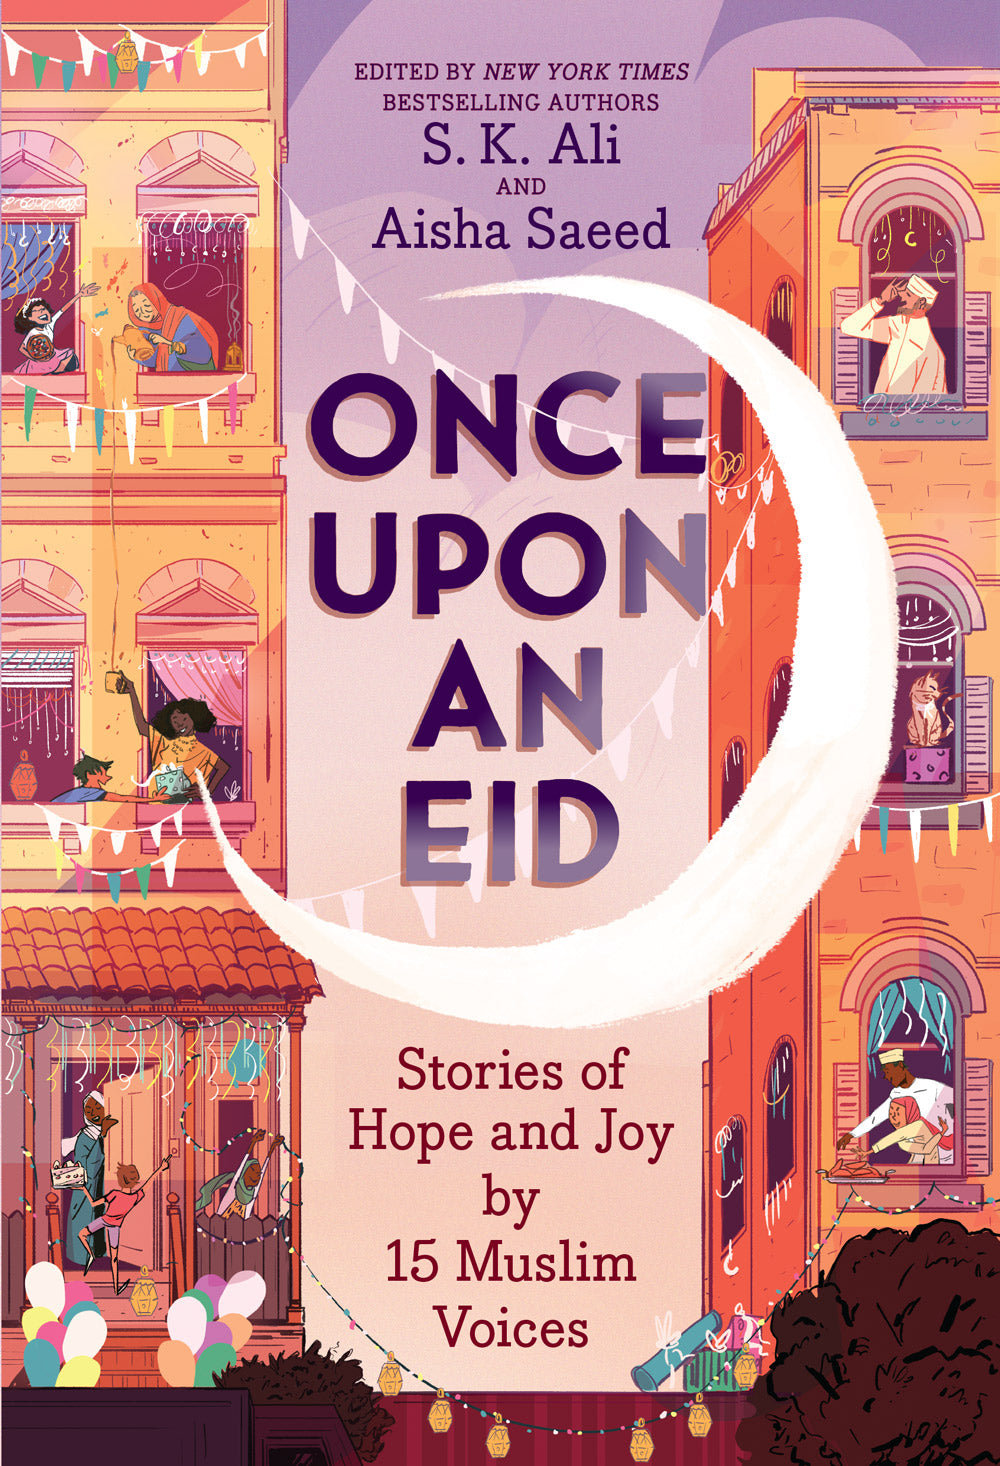 Once Upon an Eid: Stories of Hope and Joy by 15 Muslim Voices- Sara Alfageeh